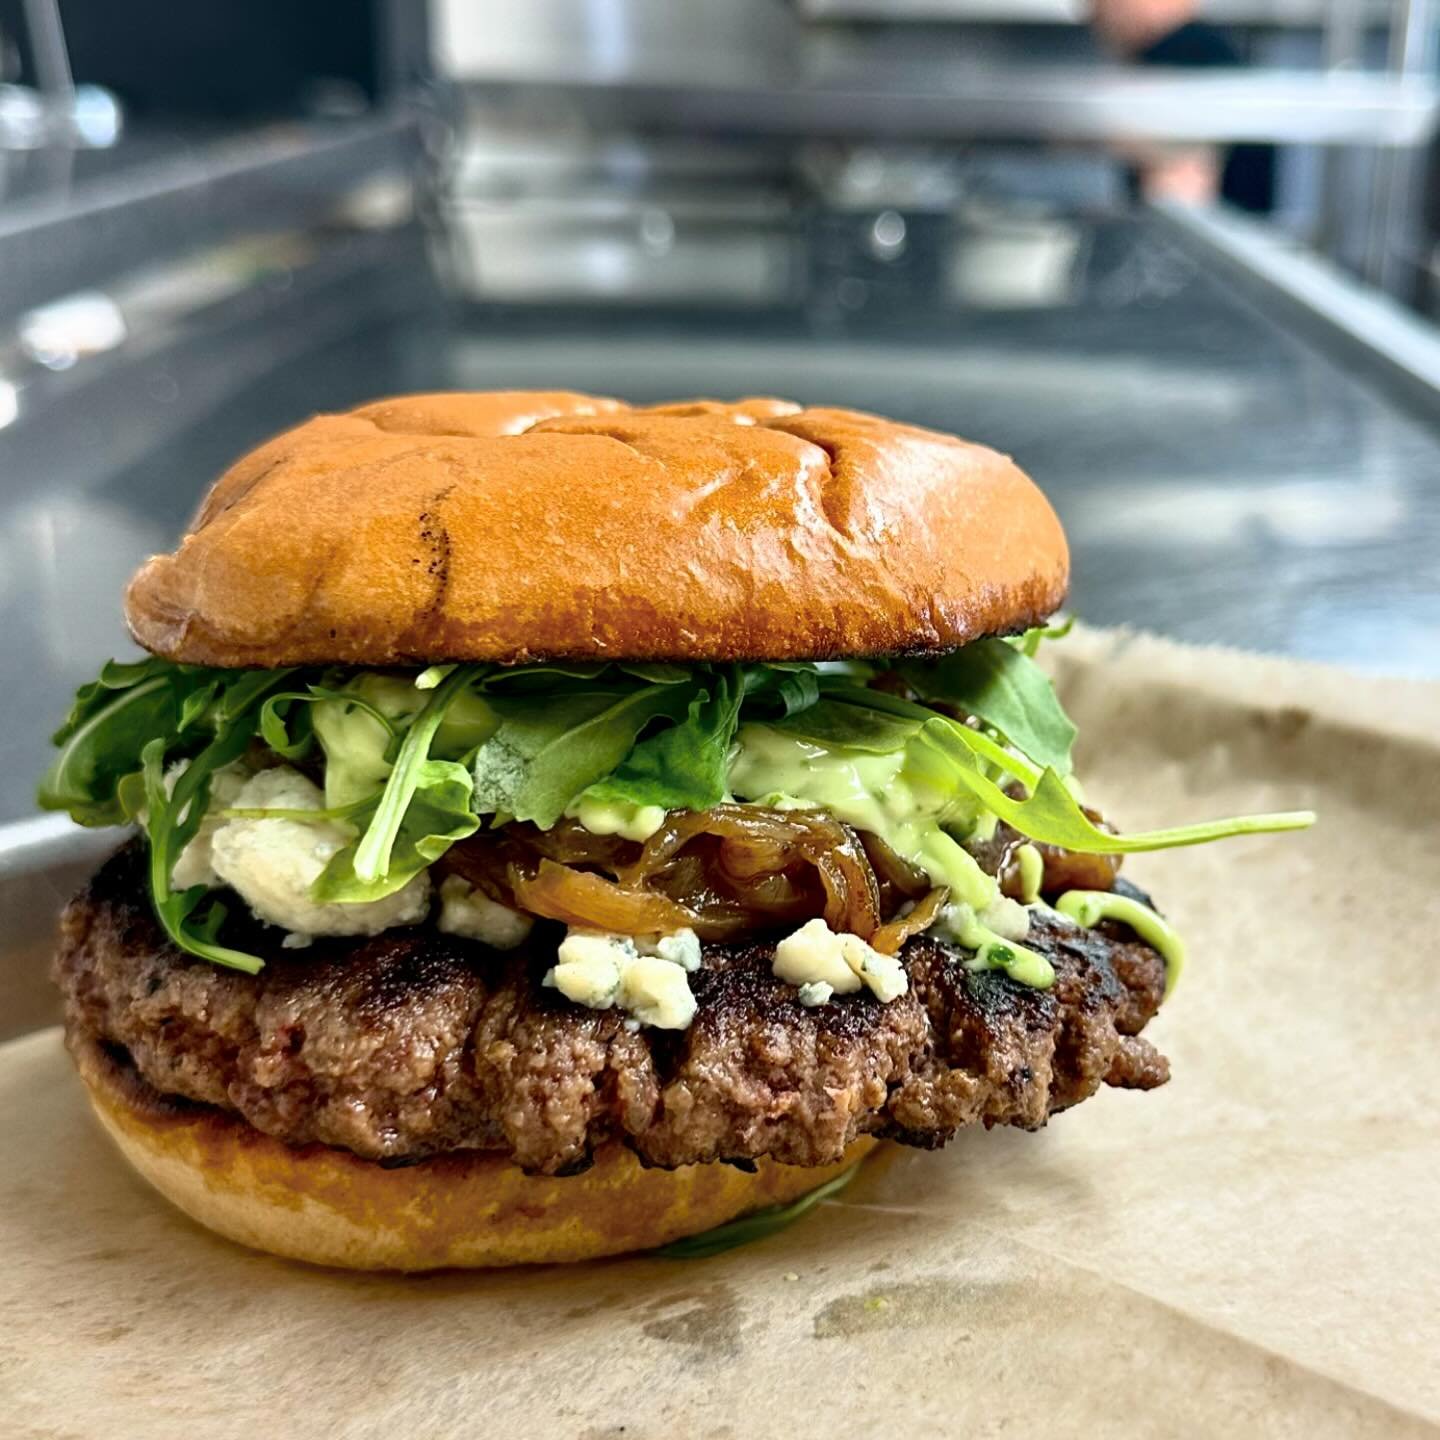 Thursday Specials for 4/25!

🍔 Bleu Cheese Onion Burger with caramelized onions, arugula, blue cheese (obviously), and ramp pesto aioli on a brioche bun

🎣 The perfect start to warmer days - FISHERMAN&rsquo;S PLATTER! Fried shrimp, scallops, and co